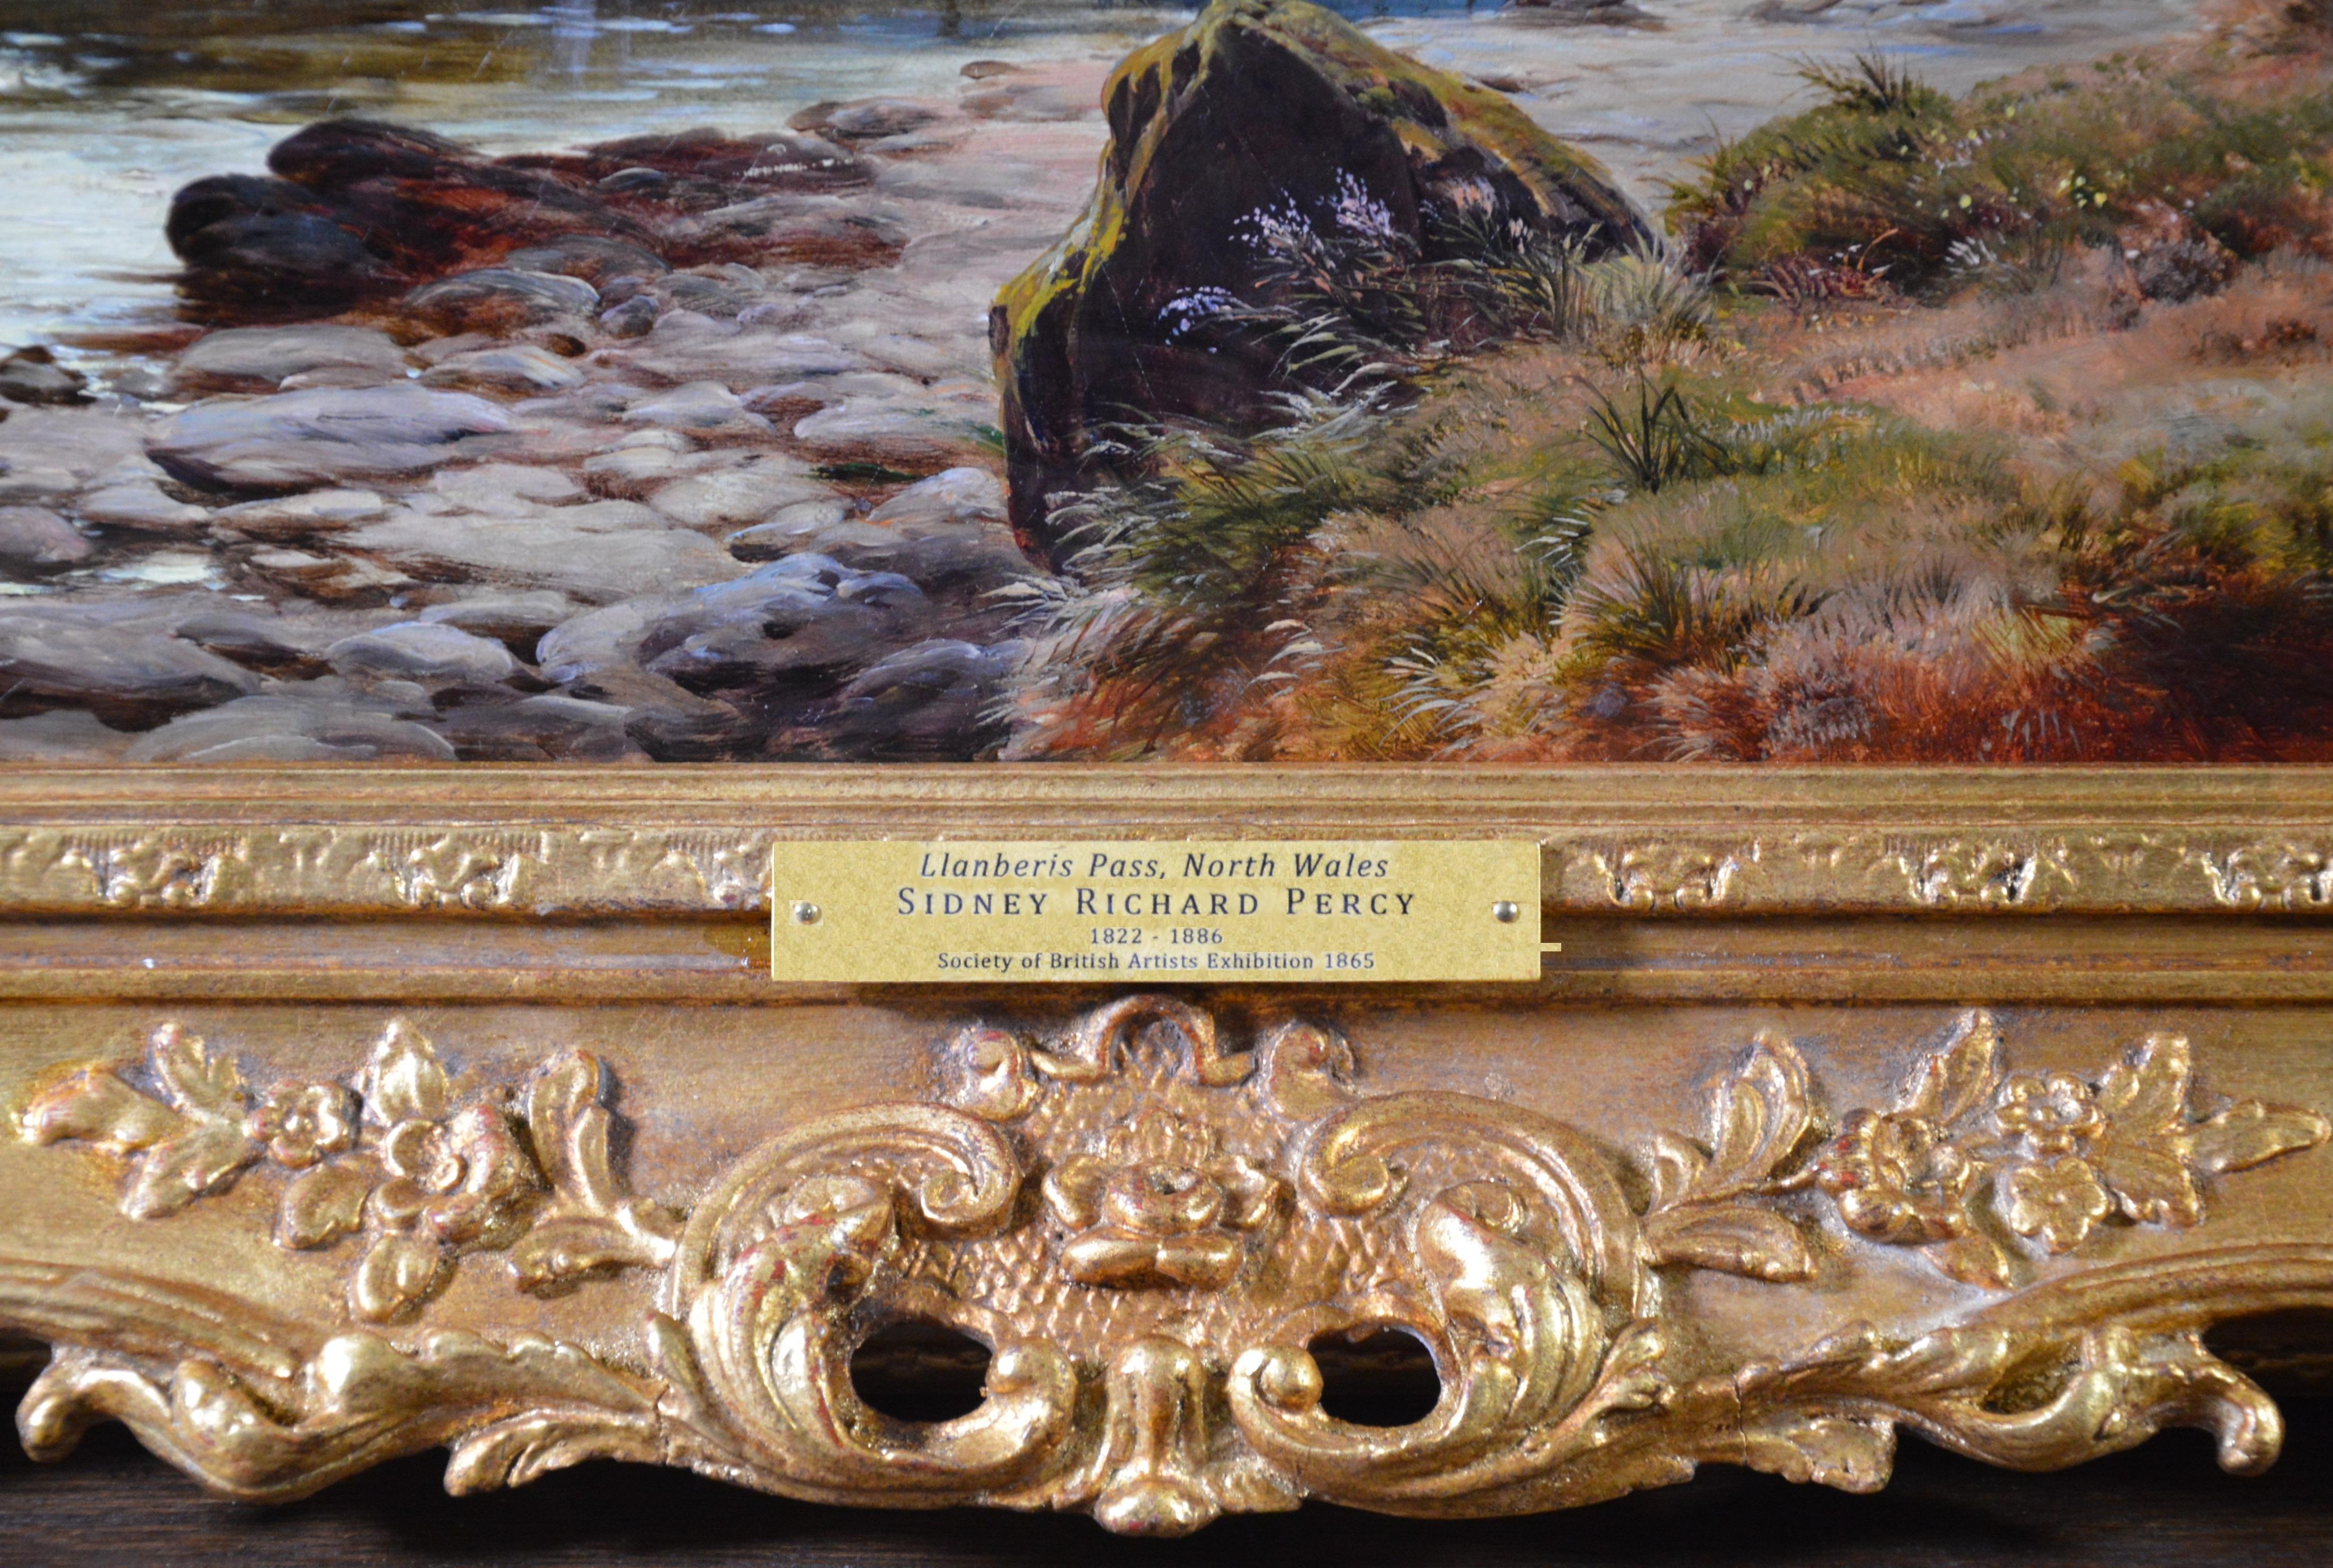 Llanberis Pass, North Wales - Large 19th Century Exhibition Oil Painting 1879 4